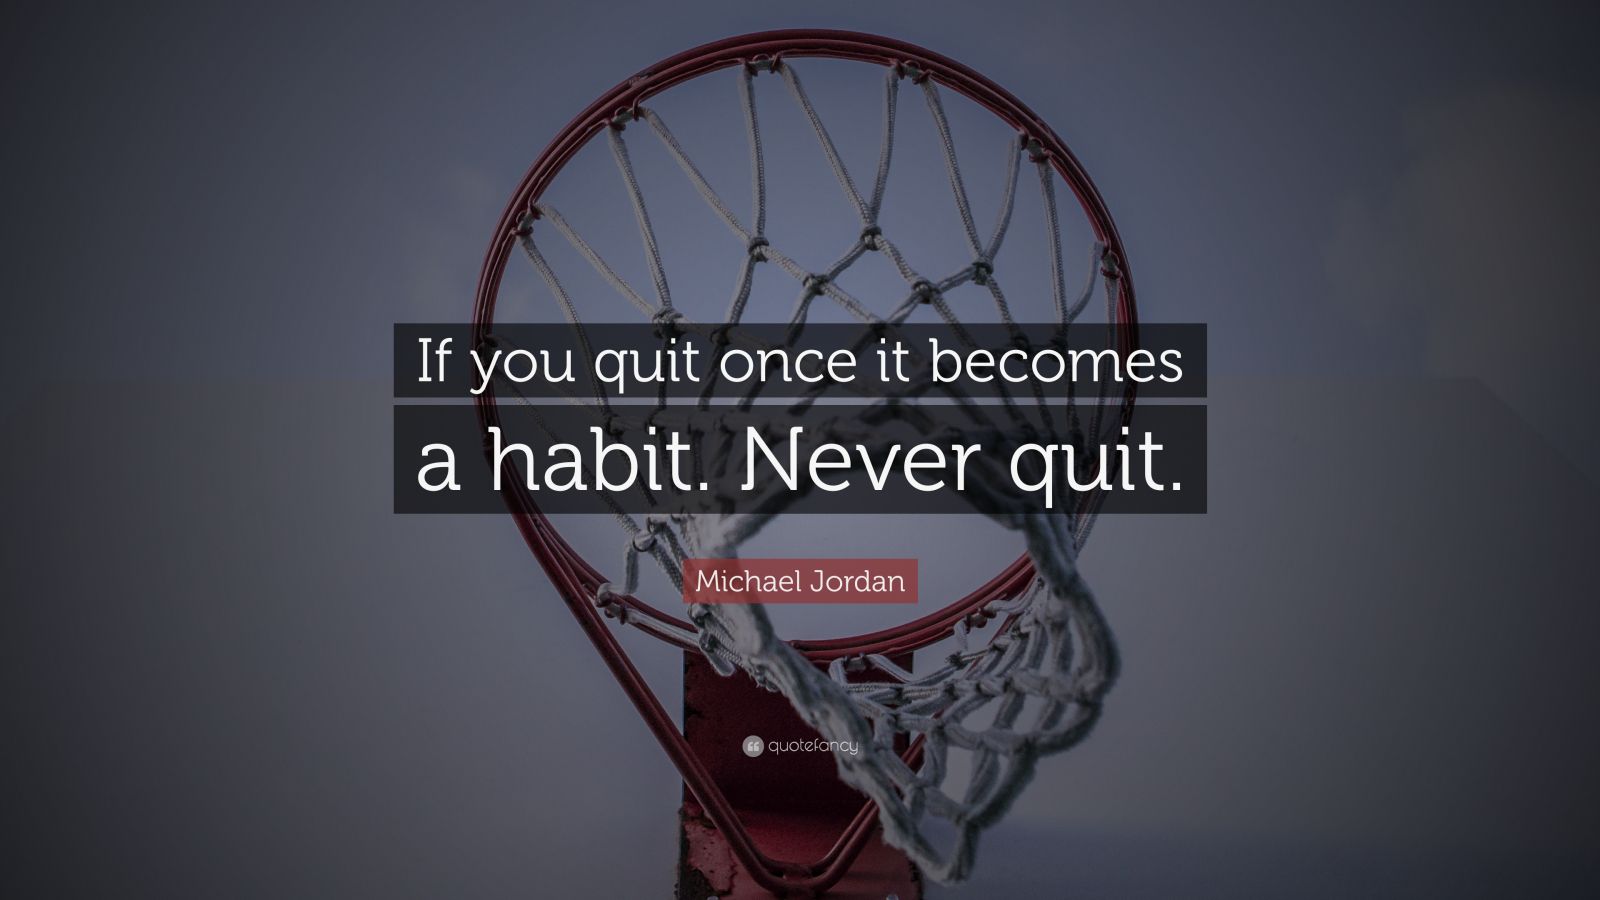 Michael Jordan Quote: “If you quit once it becomes a habit. Never quit